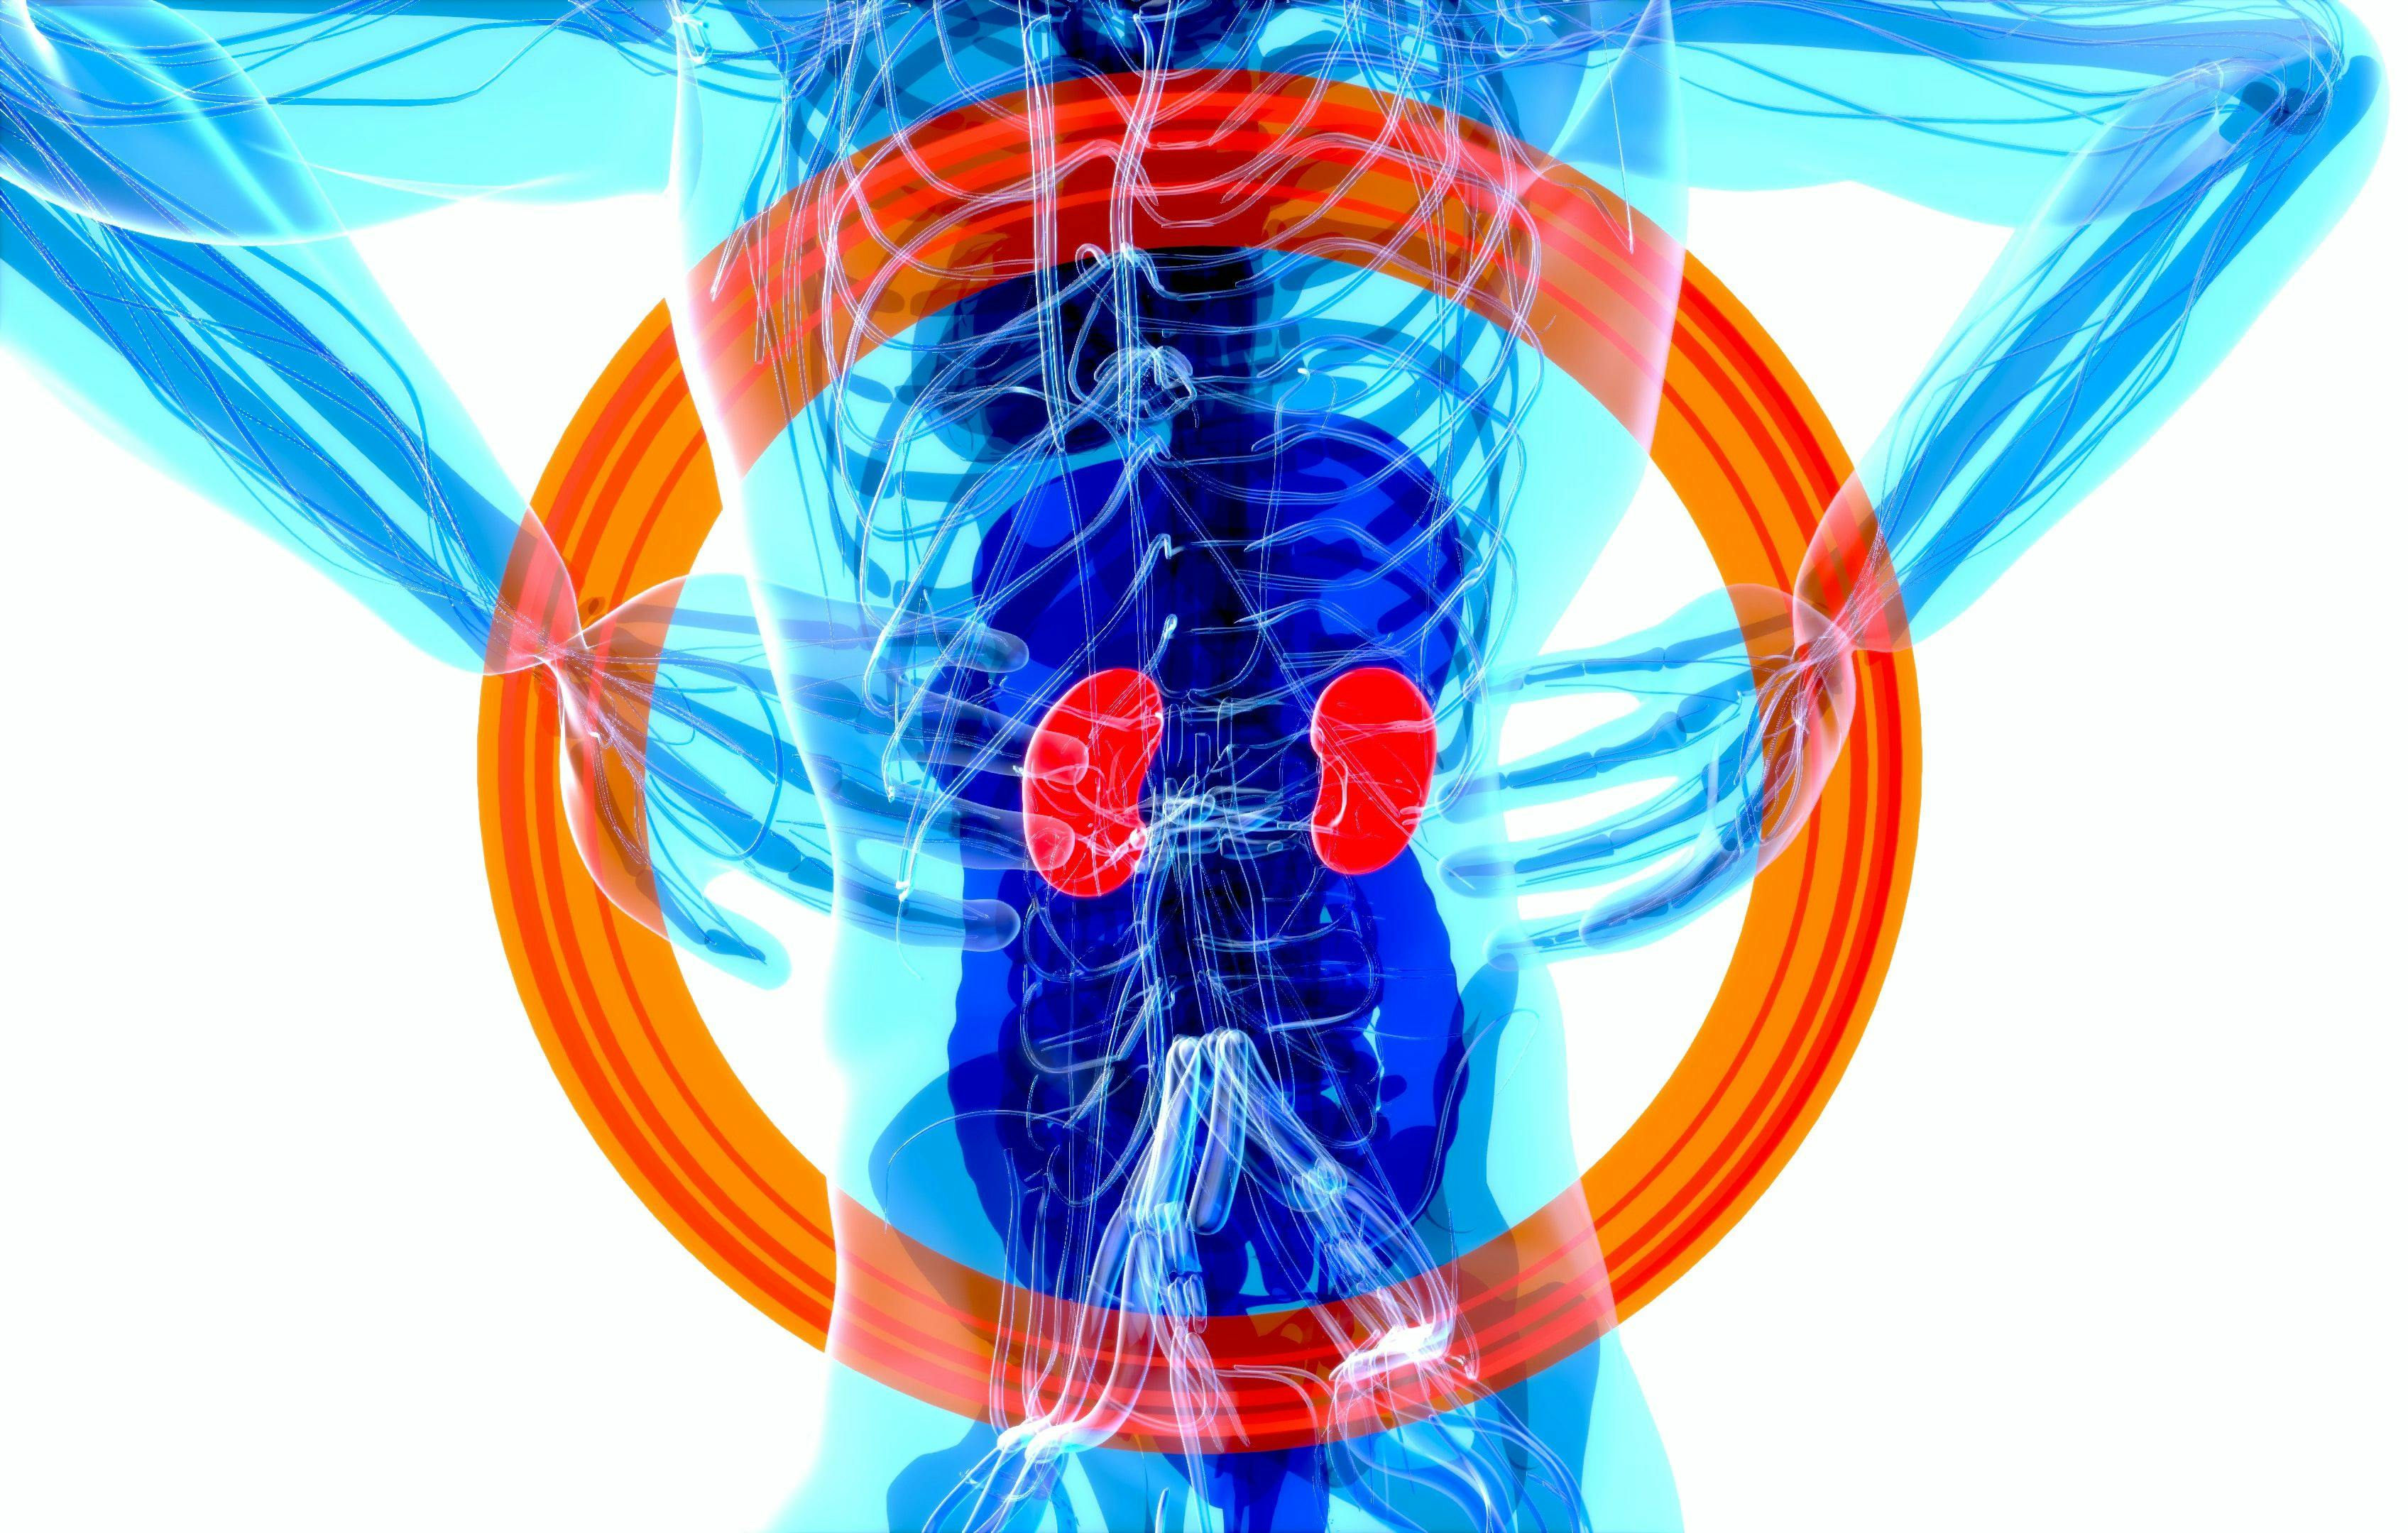 Committee Recommends Remdesivir to Treat COVID-19 in People With Severe Kidney Disease